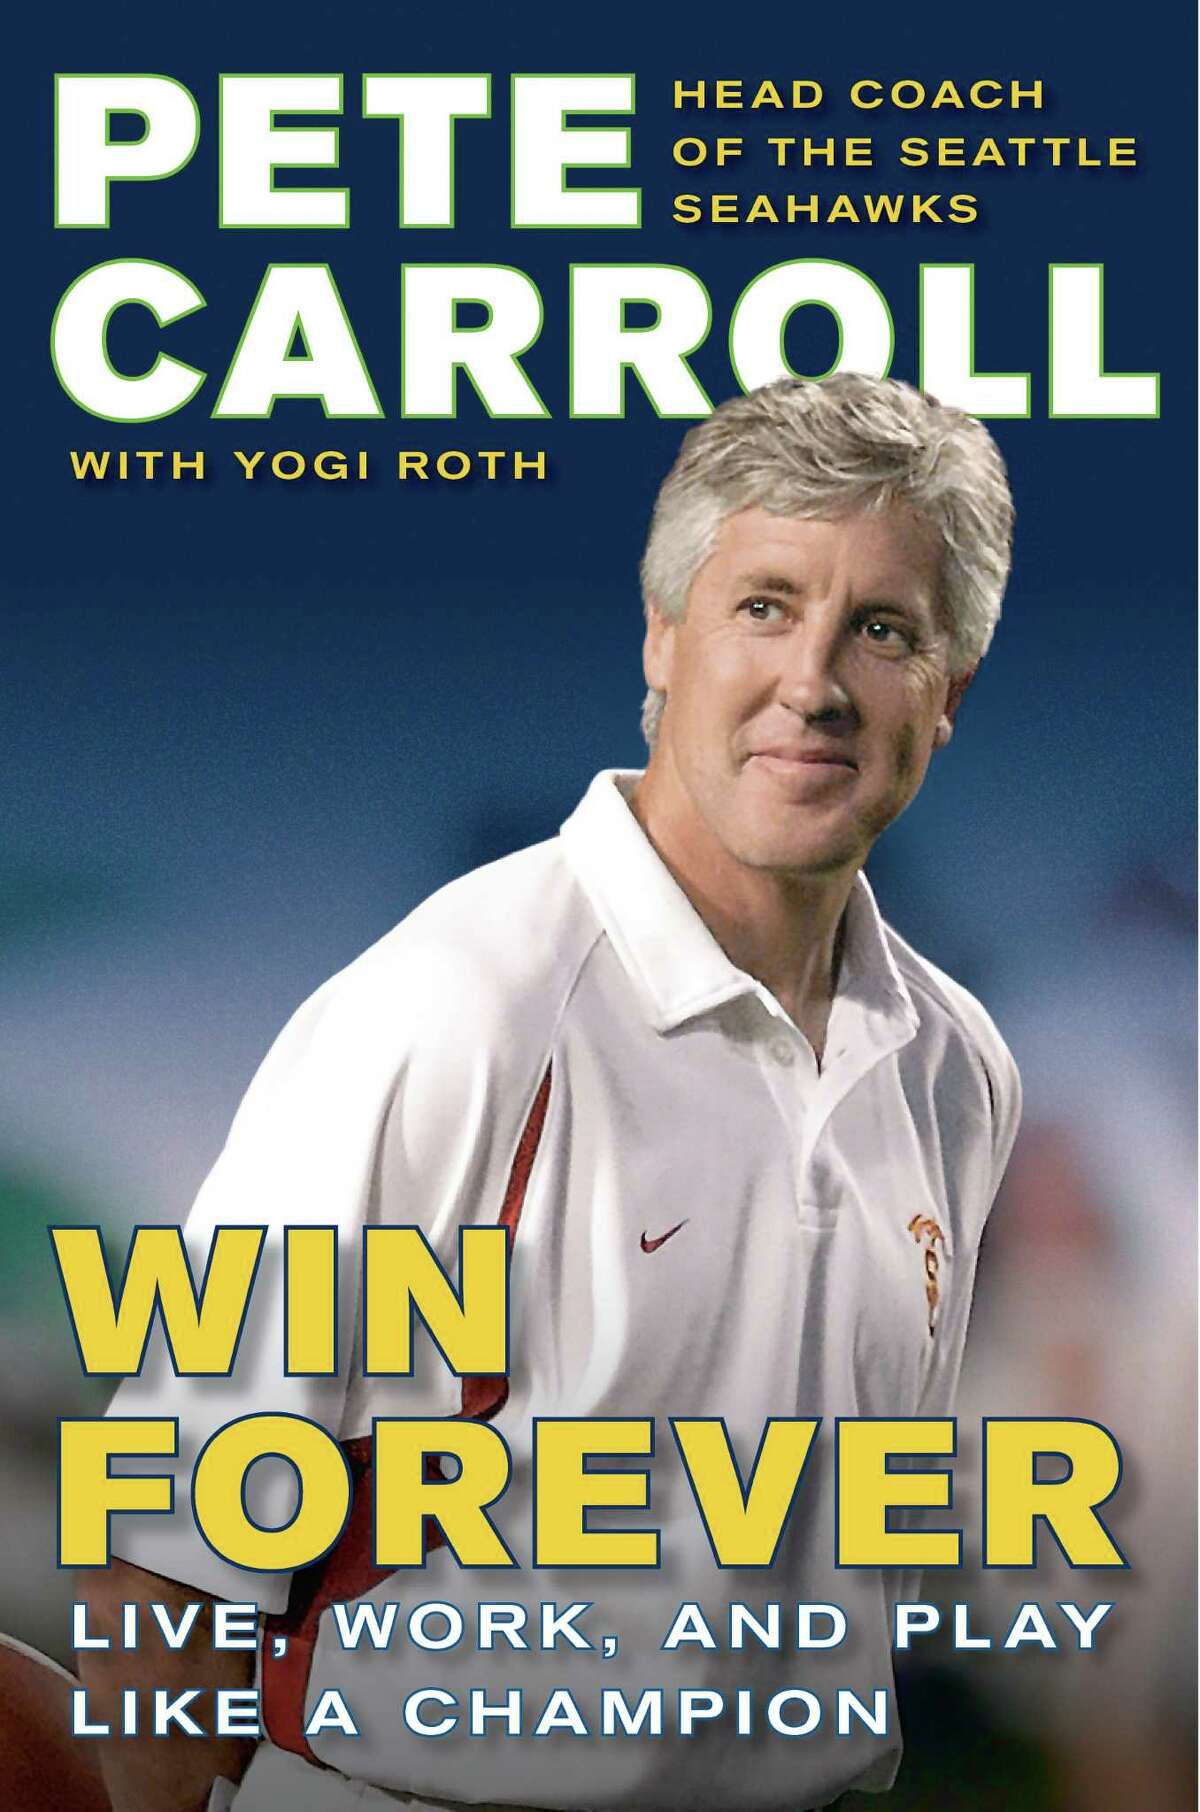 9) Pete Carroll's book wasn't titled, "Blow Games Forever." There can't be a coach better equipped to get a bounce-back from his team than the Seahawks' head man. Sequel: "From Devastating to Dominating Again."